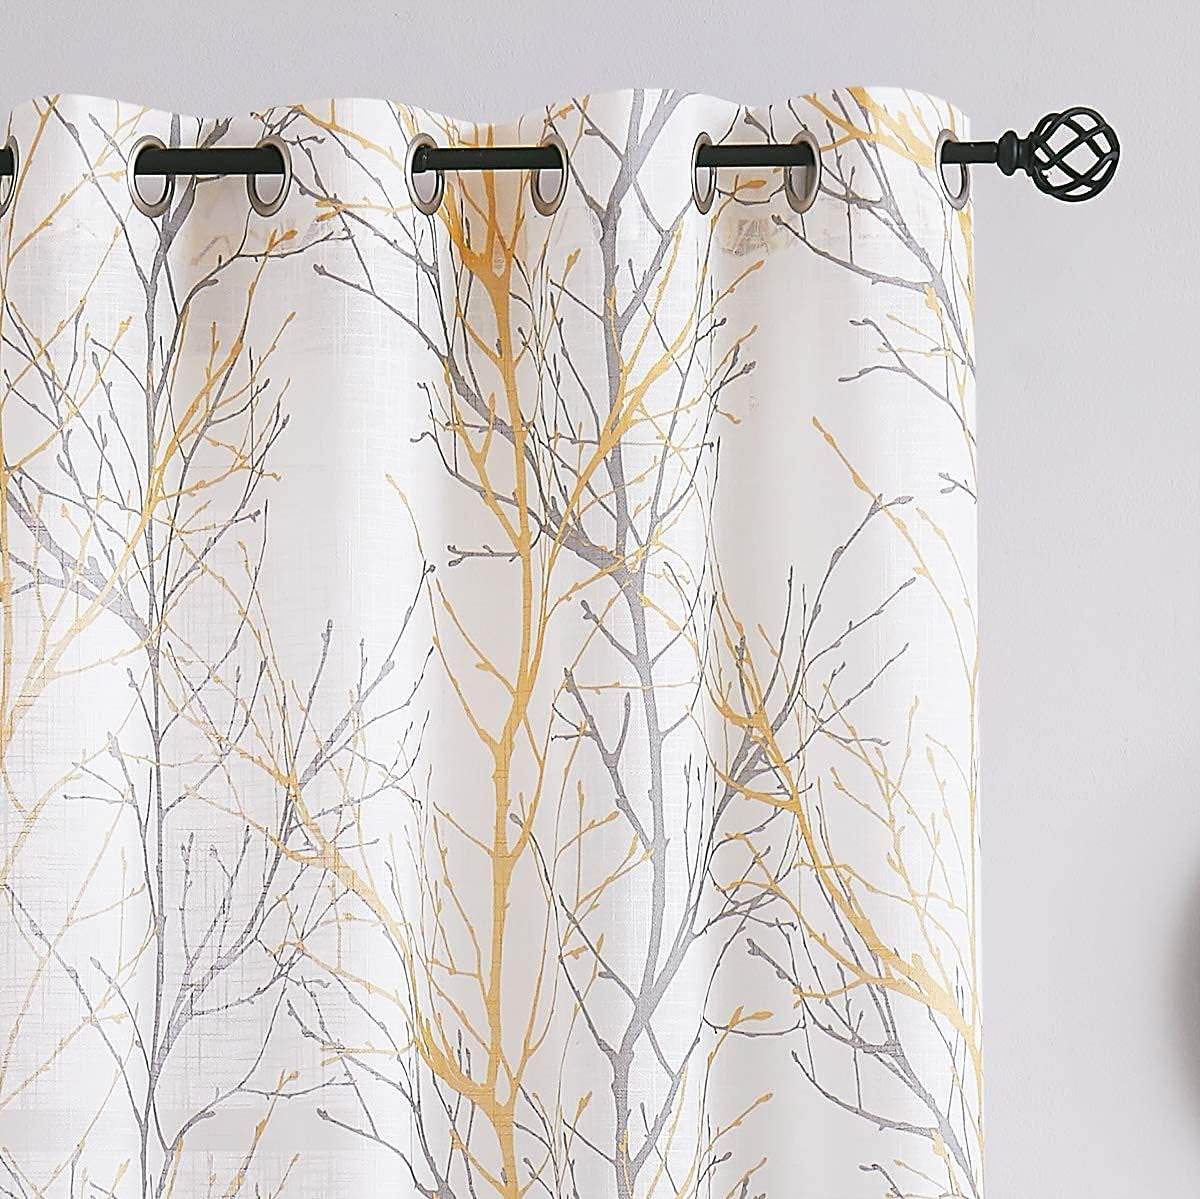 FMFUNCTEX Blue White Curtains for Kitchen Living Room 72“ Grey Tree Branches Print Curtain Set for Small Windows Linen Textured Semi-Sheer Drapes for Bedroom Grommet Top, 2 Panels  Fmfunctex Yellow 50" X 54" |2Pcs 